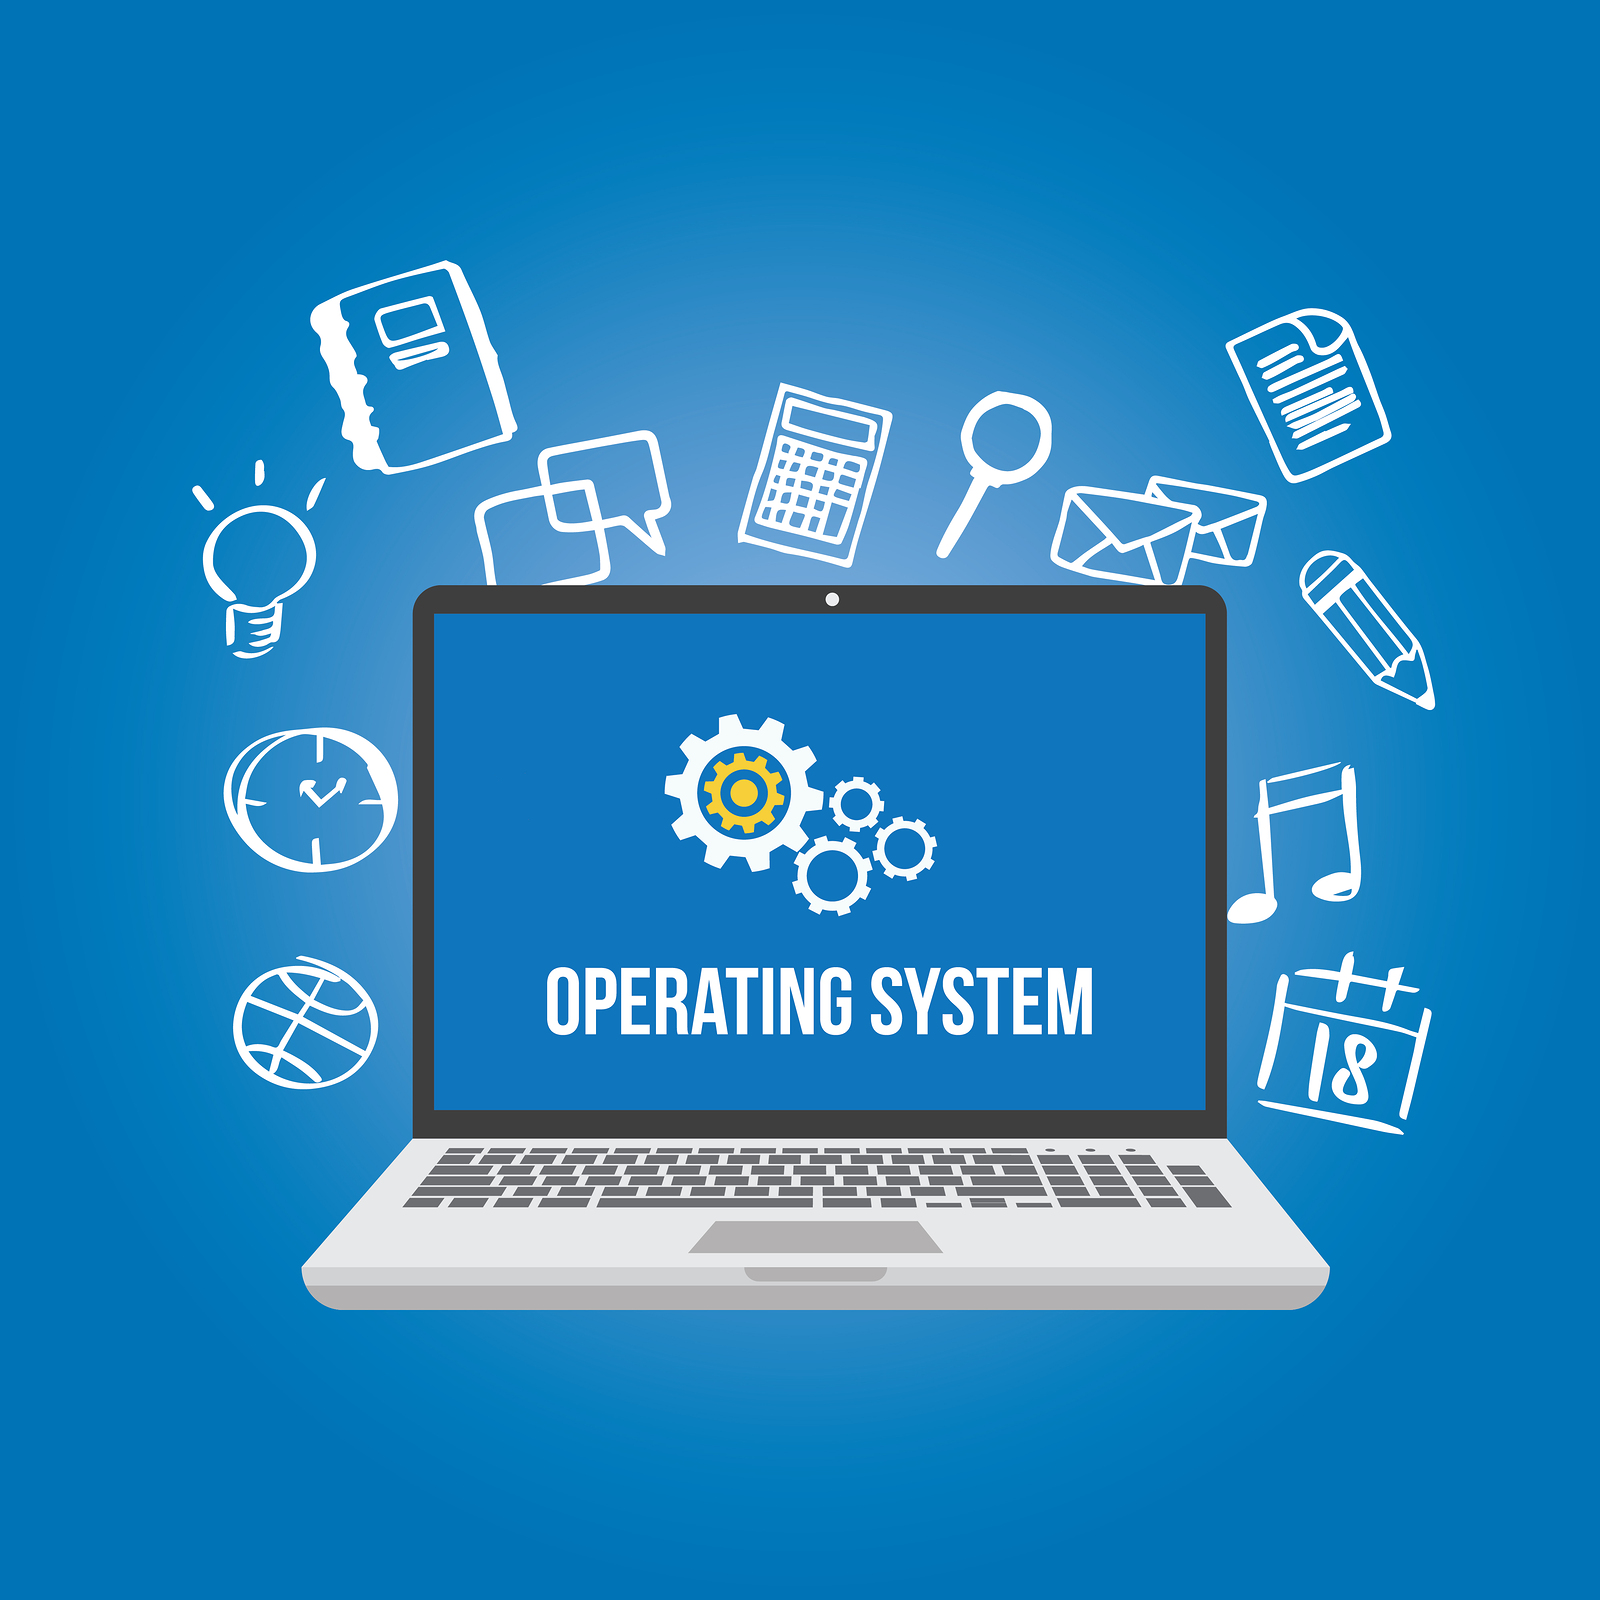 Operating System - Interview Question and Answers